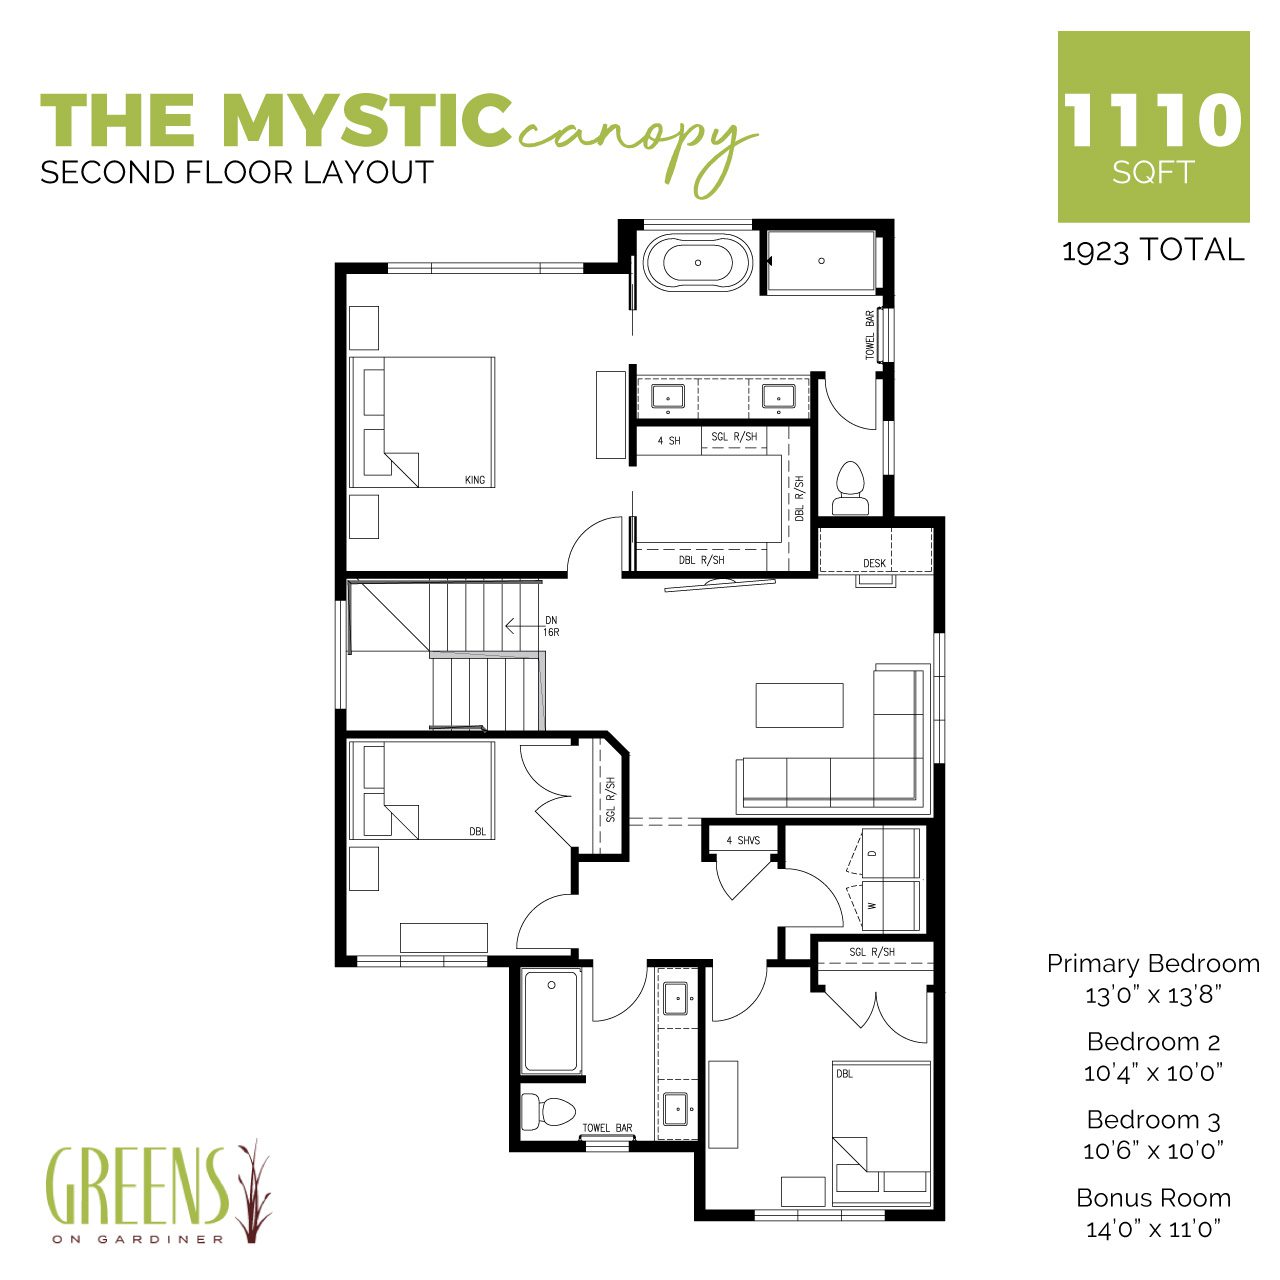 A second floor layout showing three bedrooms, two bathrooms, upstairs laundry, and bonus room.